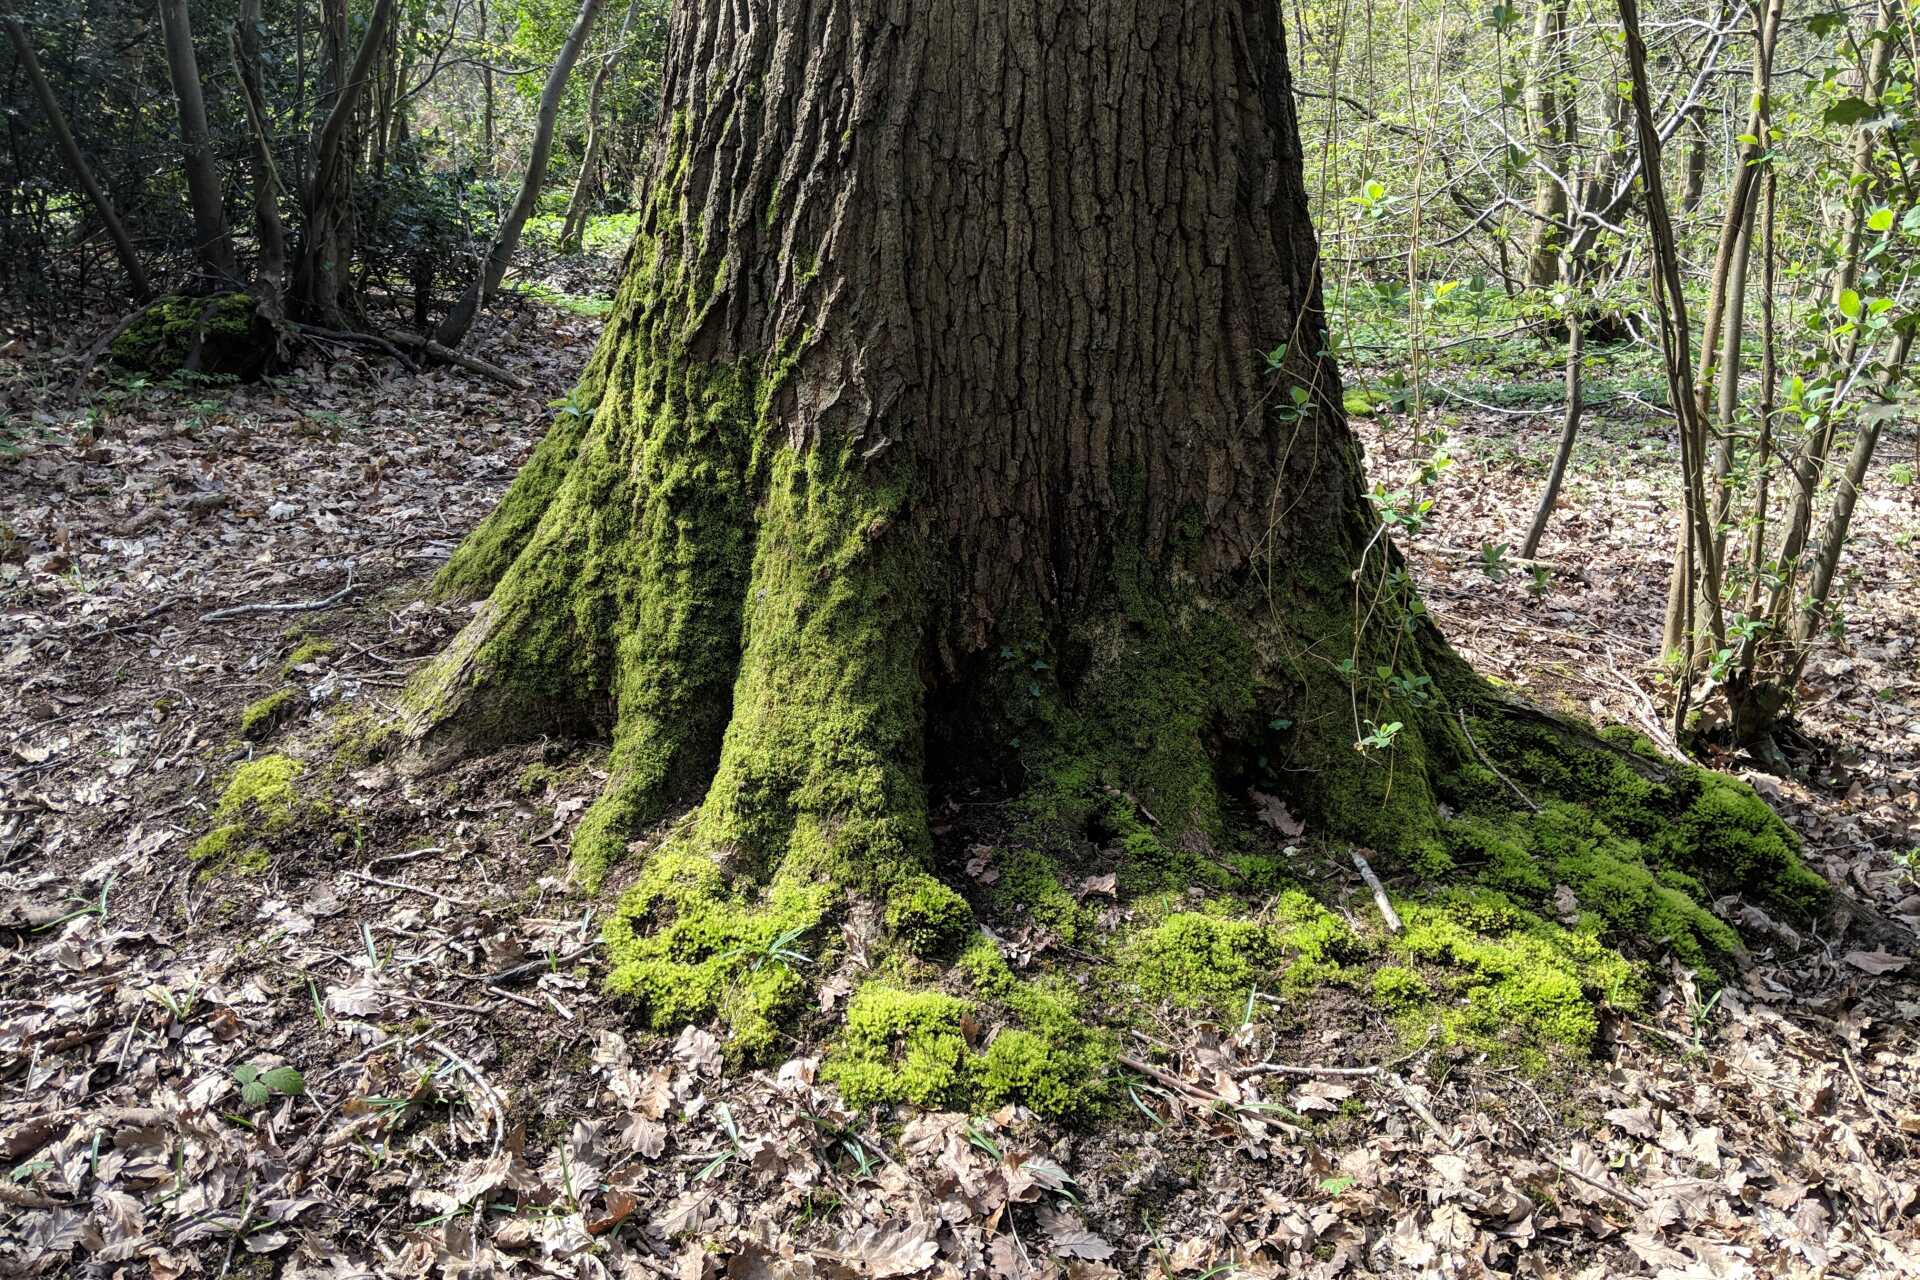 A tree trunk with moss growing on it, and dirt surrounding it, and trees in the background.